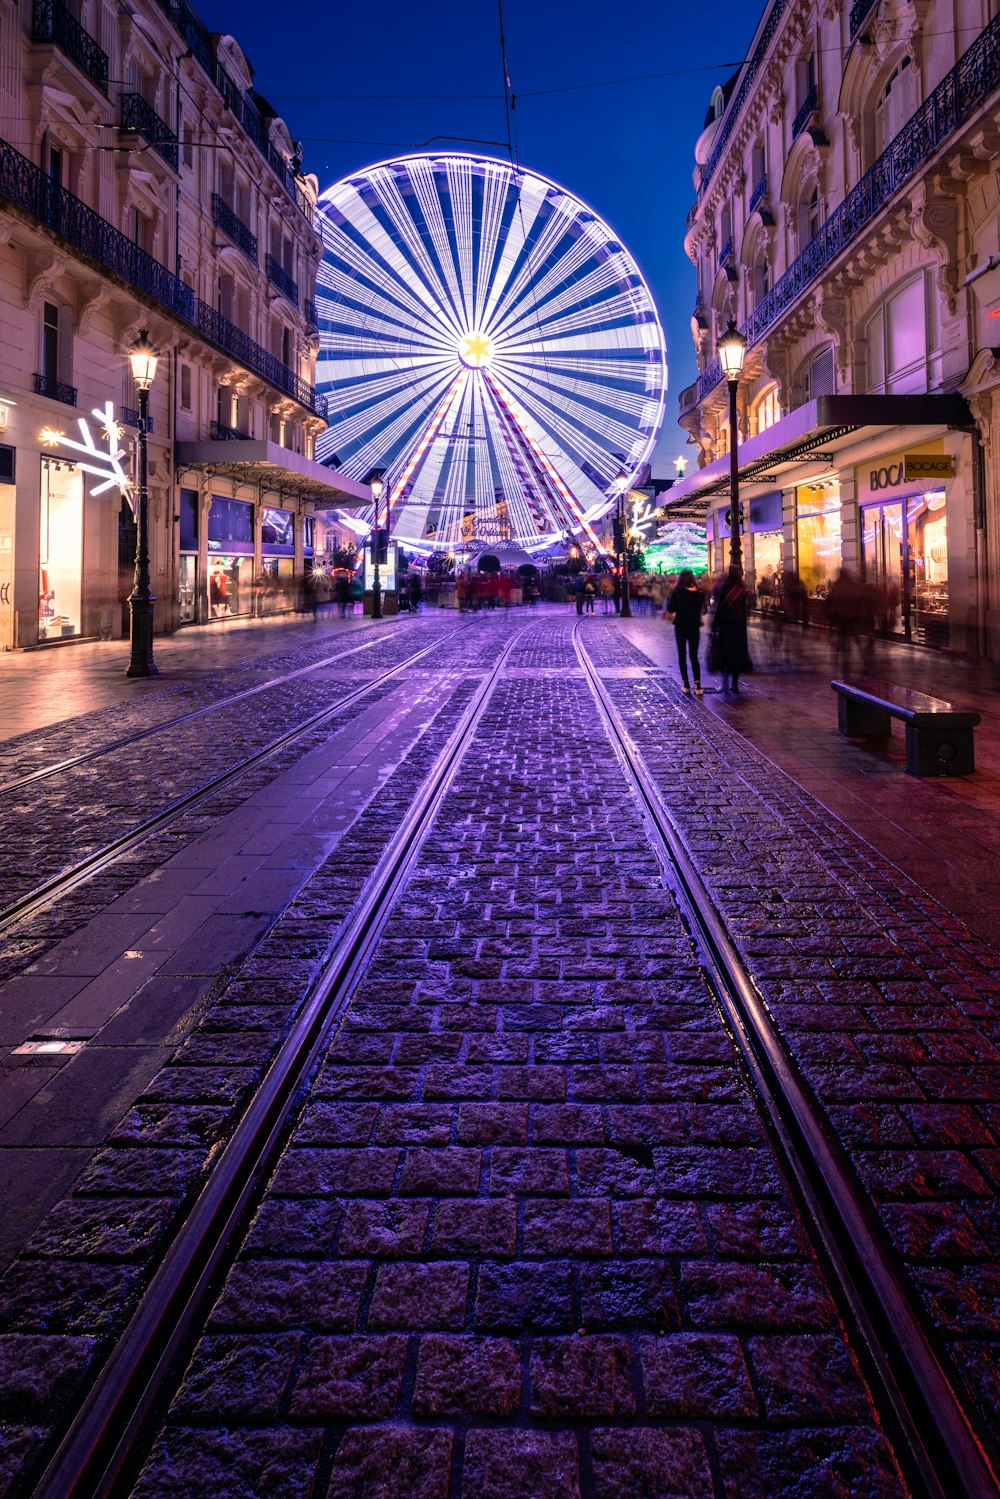 a ferris wheel in the middle of a city street